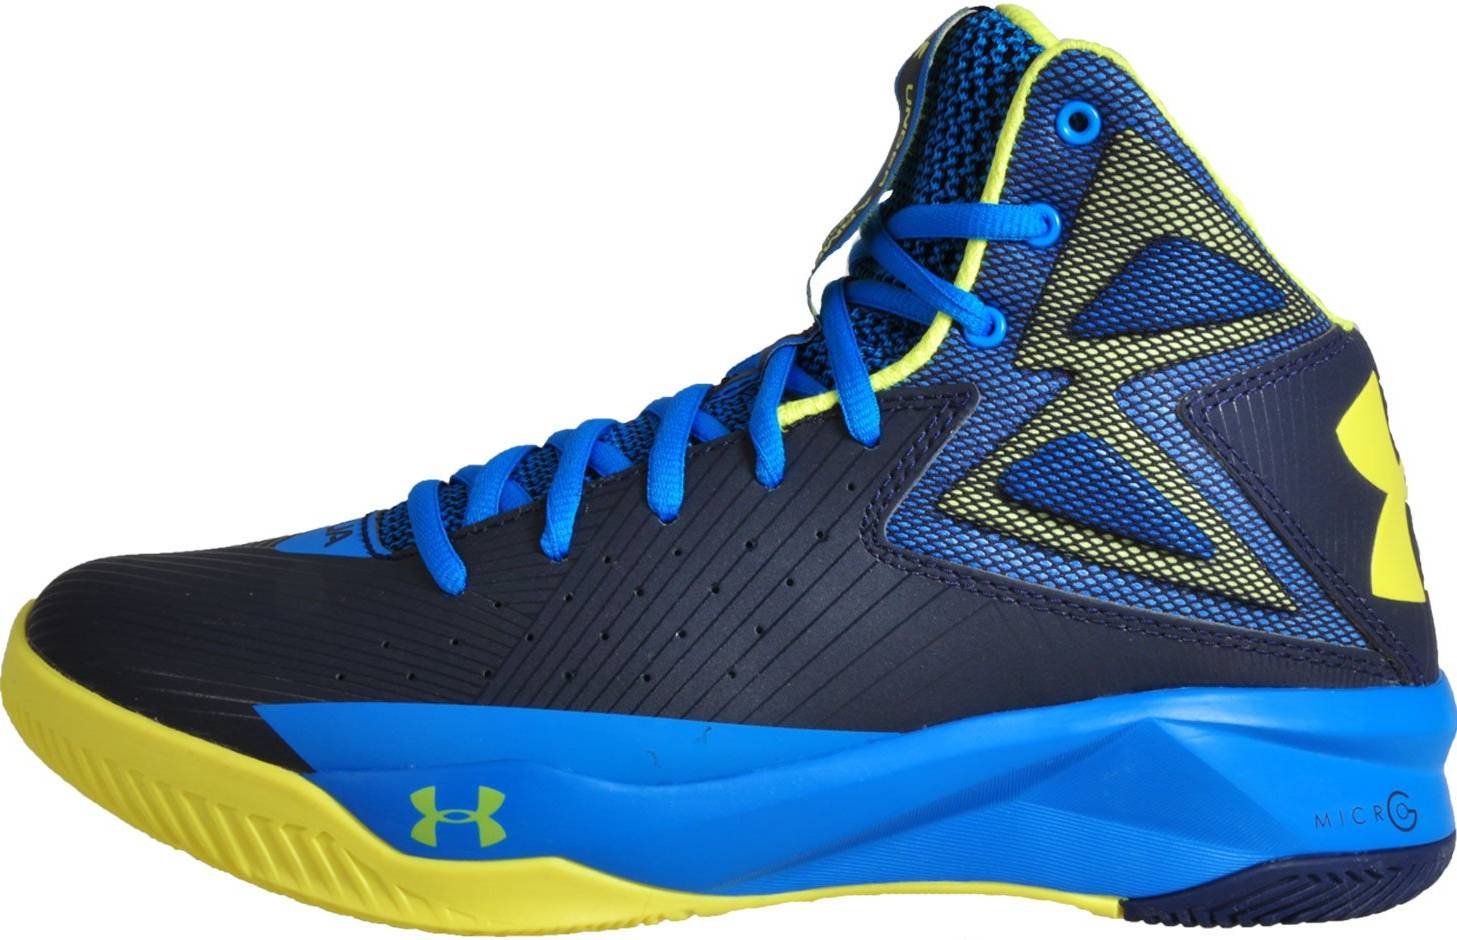 basketball shoes online shop europe